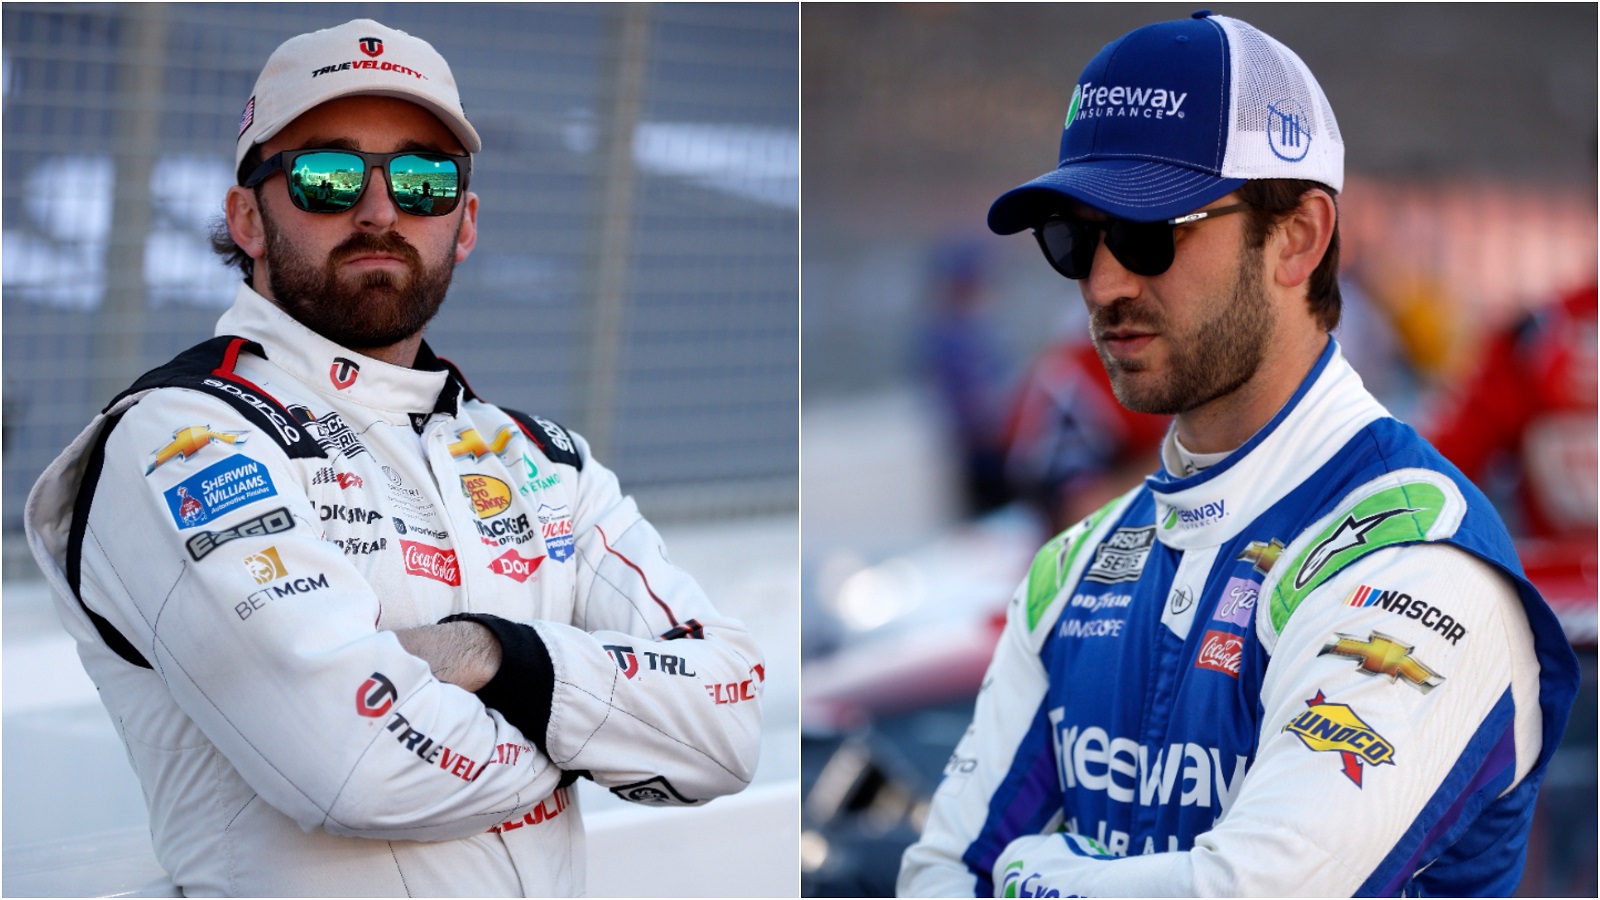 Austin Dillon was on his way to another top-10 finish until getting spun by Daniel Suarez at Phoenix Raceway. | Getty Images